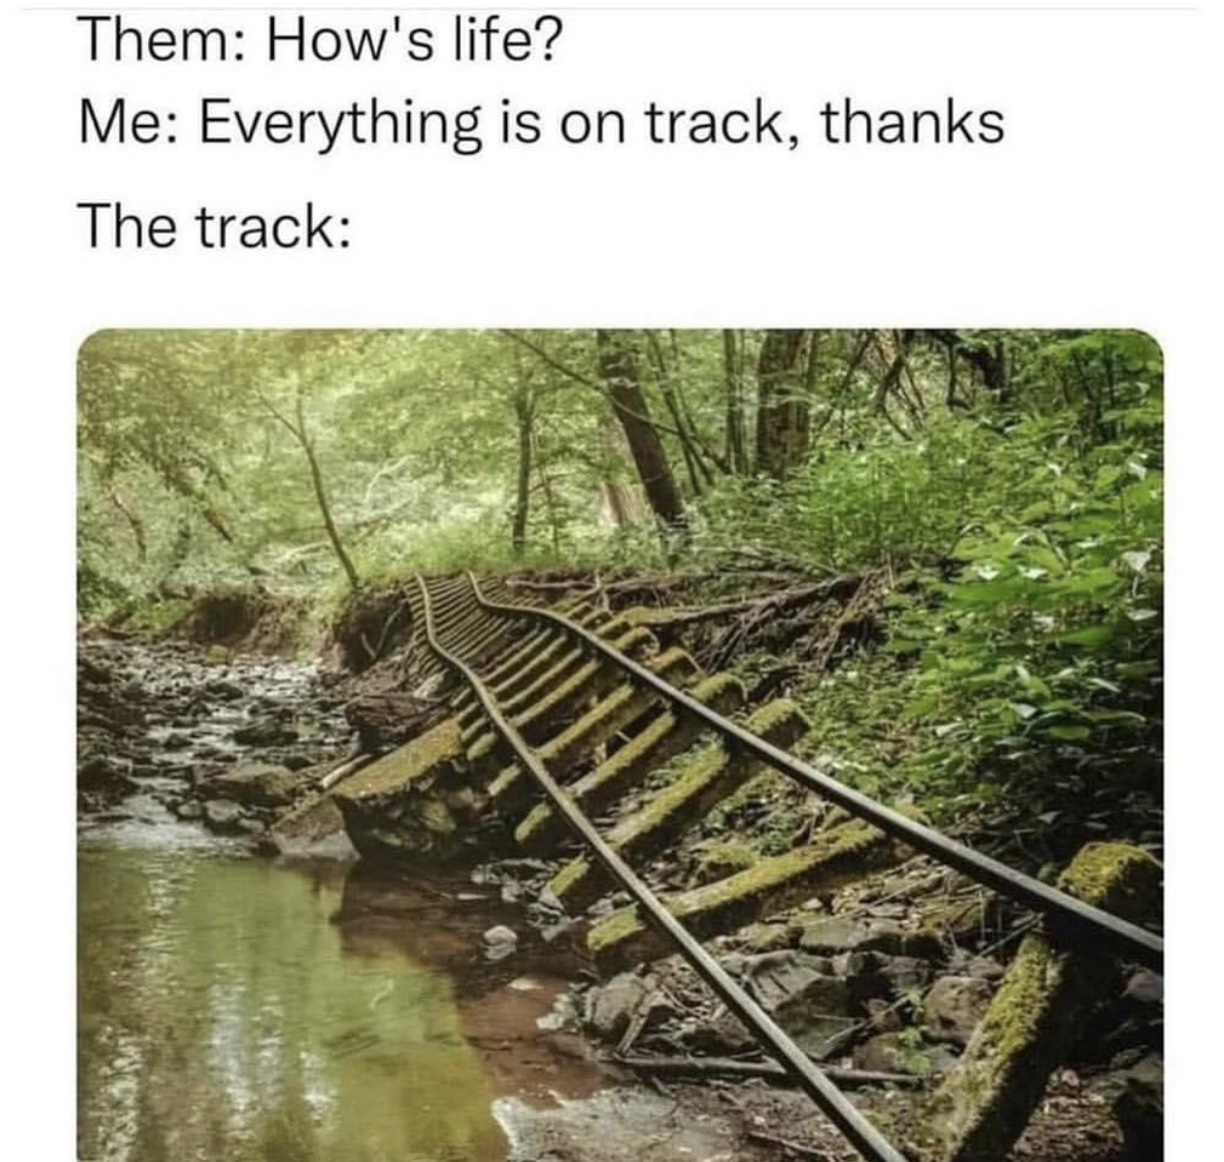 hows life? everything is on track thanks. the track